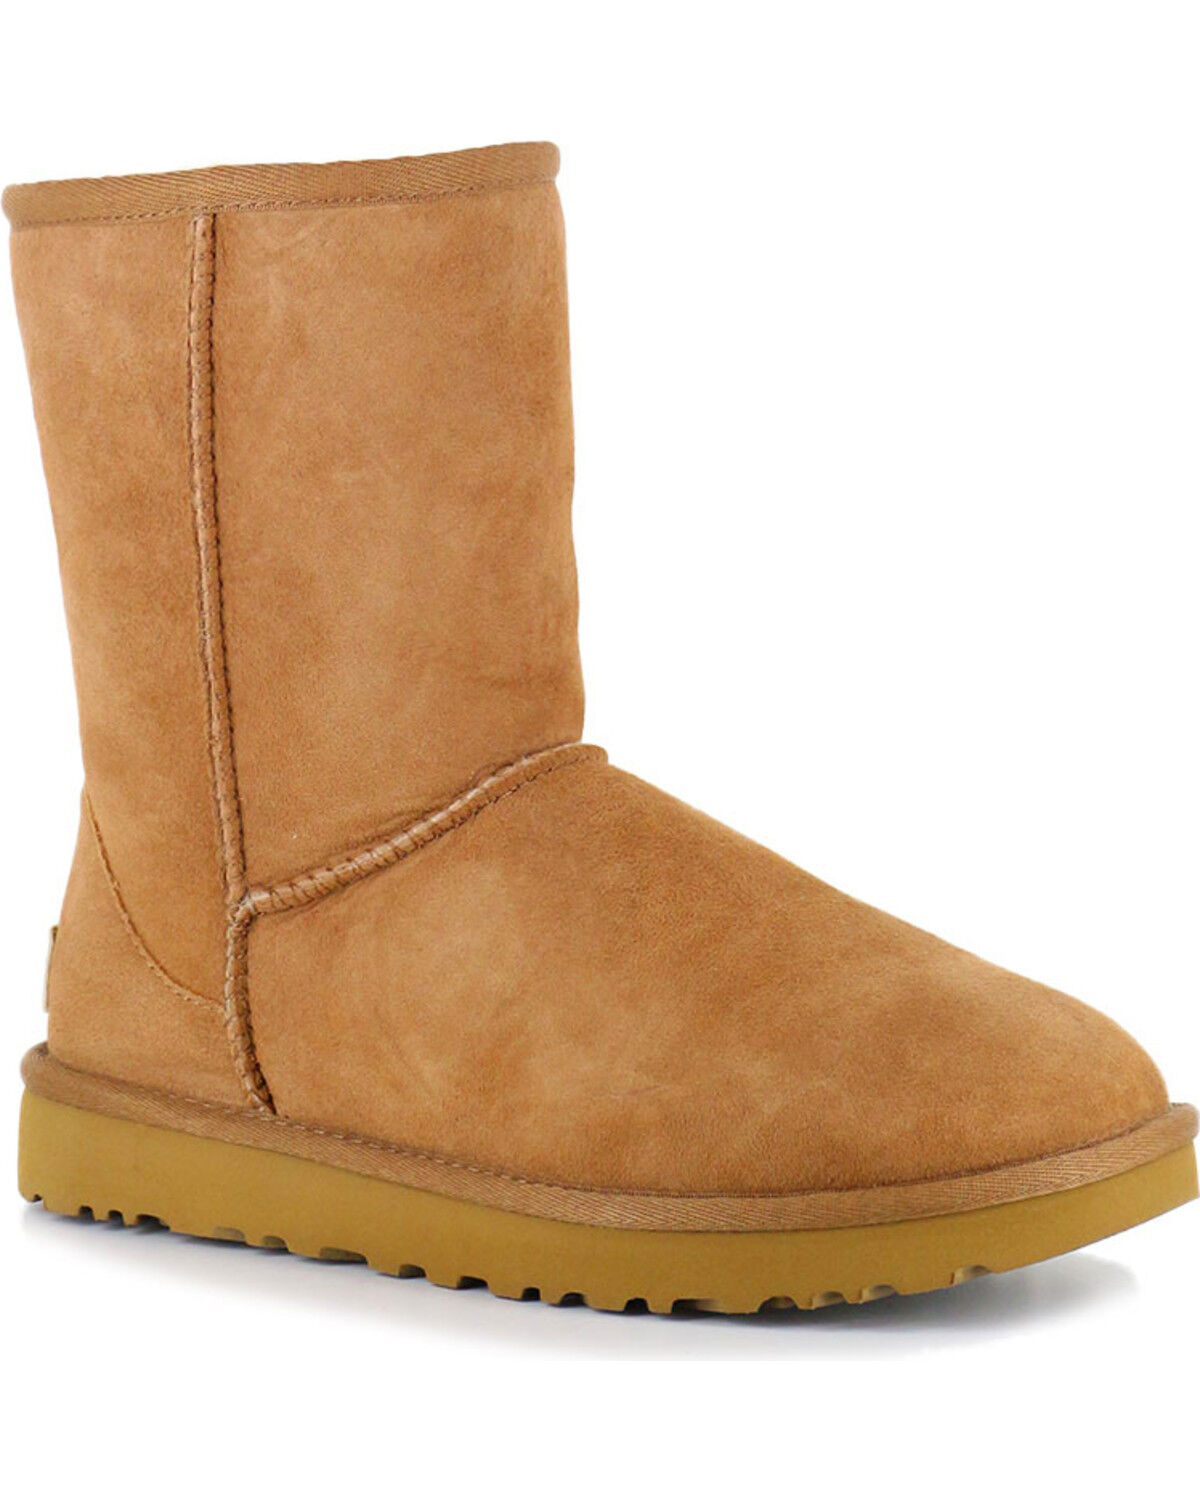 who sells ugg boots near me